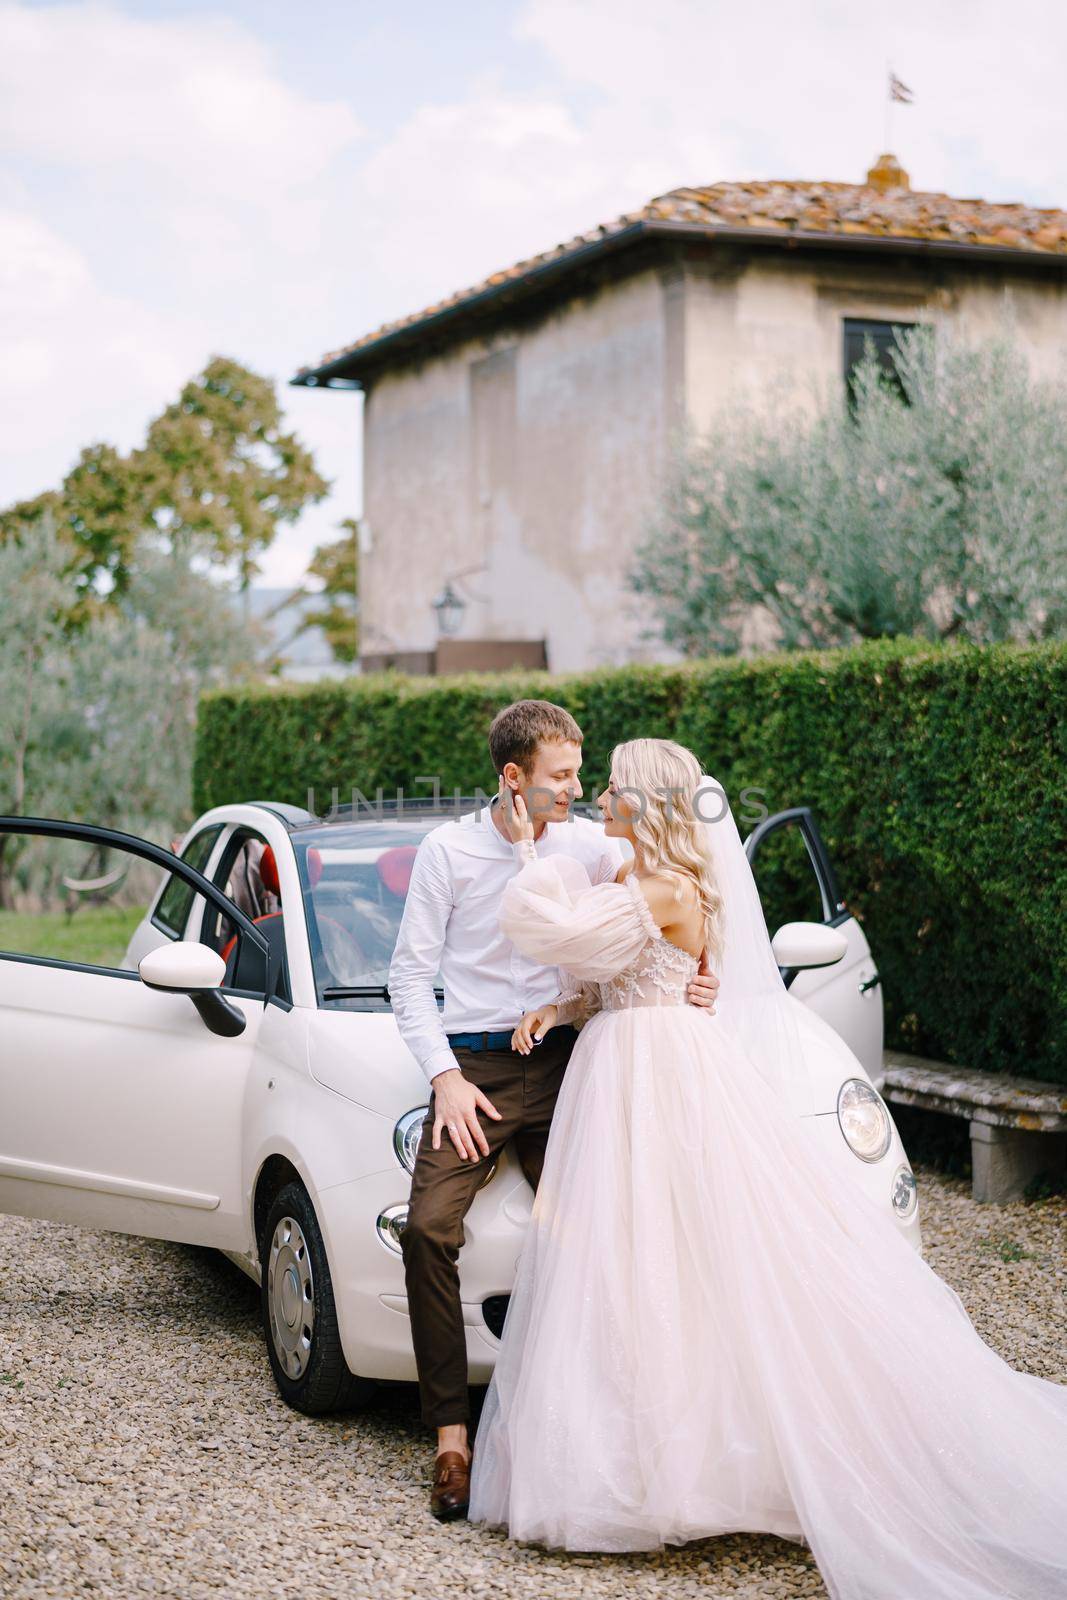 Beautiful bride and groom leaning on a convertible and looking at each other in front of the old villa in Italy, in Tuscany, near Florence